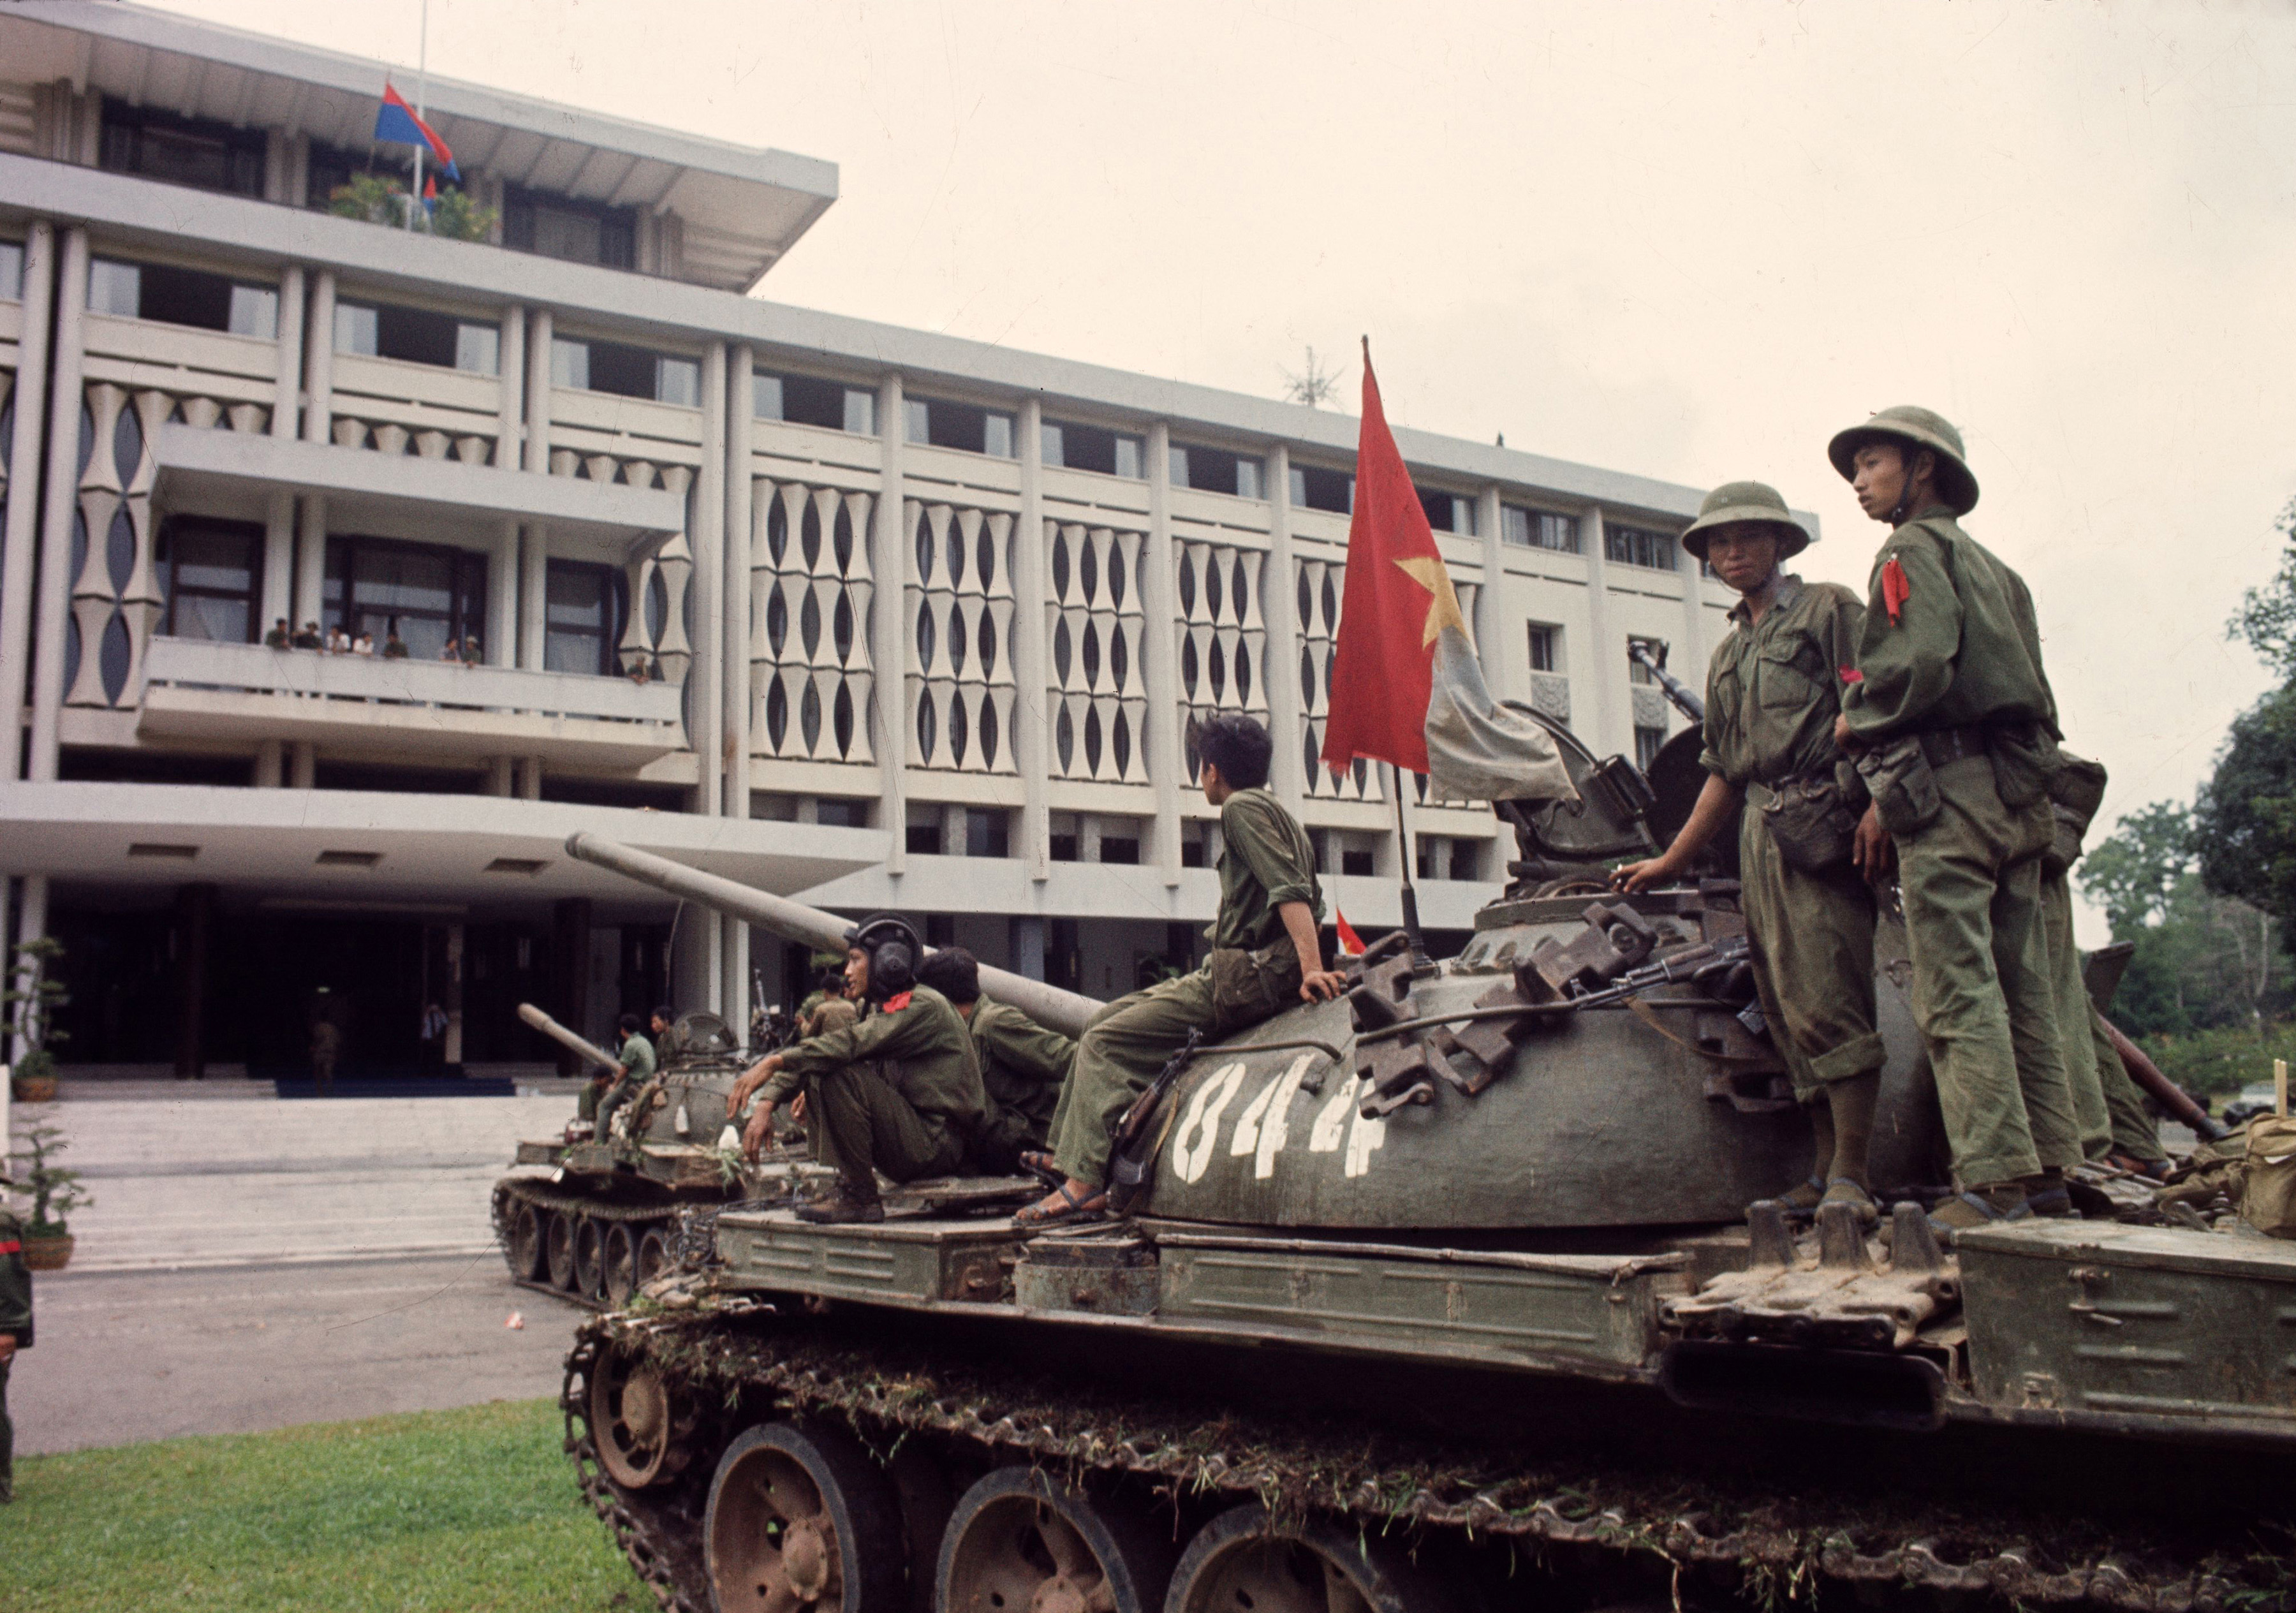 Victorious North Vietnamese troops on tanks take up positions outside Independence Palace in Saigon, April 30, 1975, the day the South Vietnamese government surrendered, ending the Vietnam War. Communist flags fly from the palace and the tank. (AP Photo/Yves Billy)